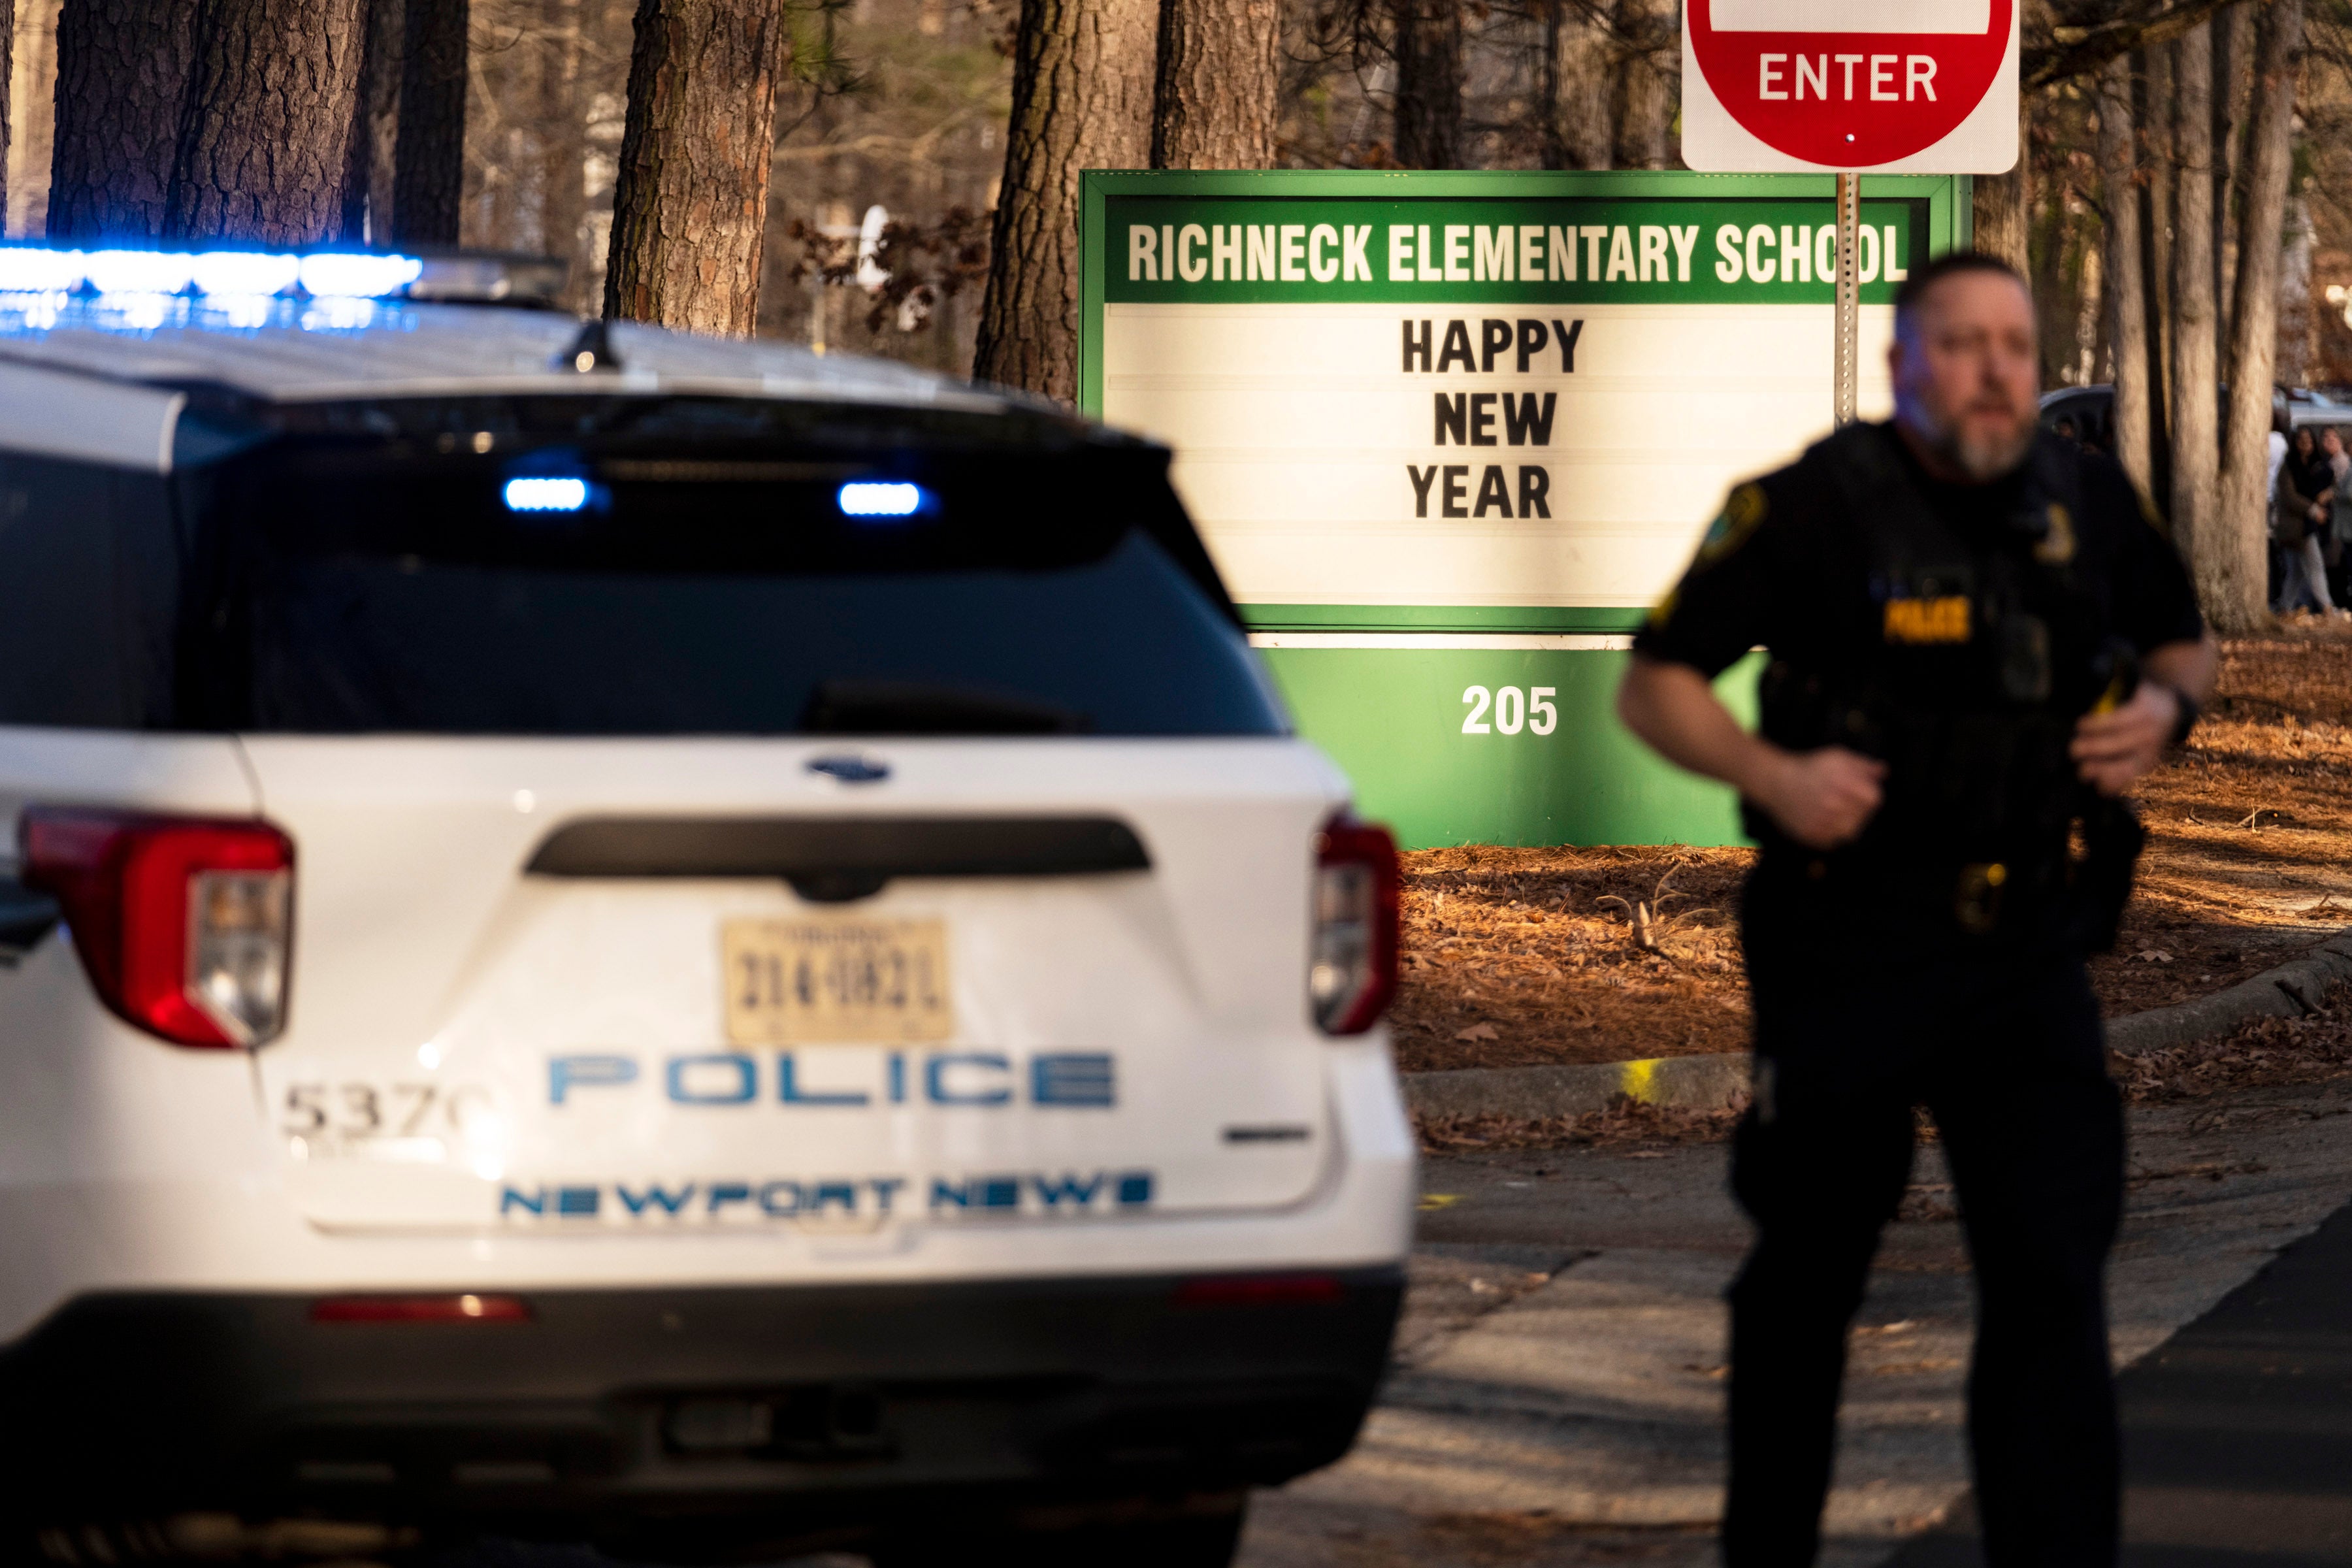 Police outside Richneck Elementary School